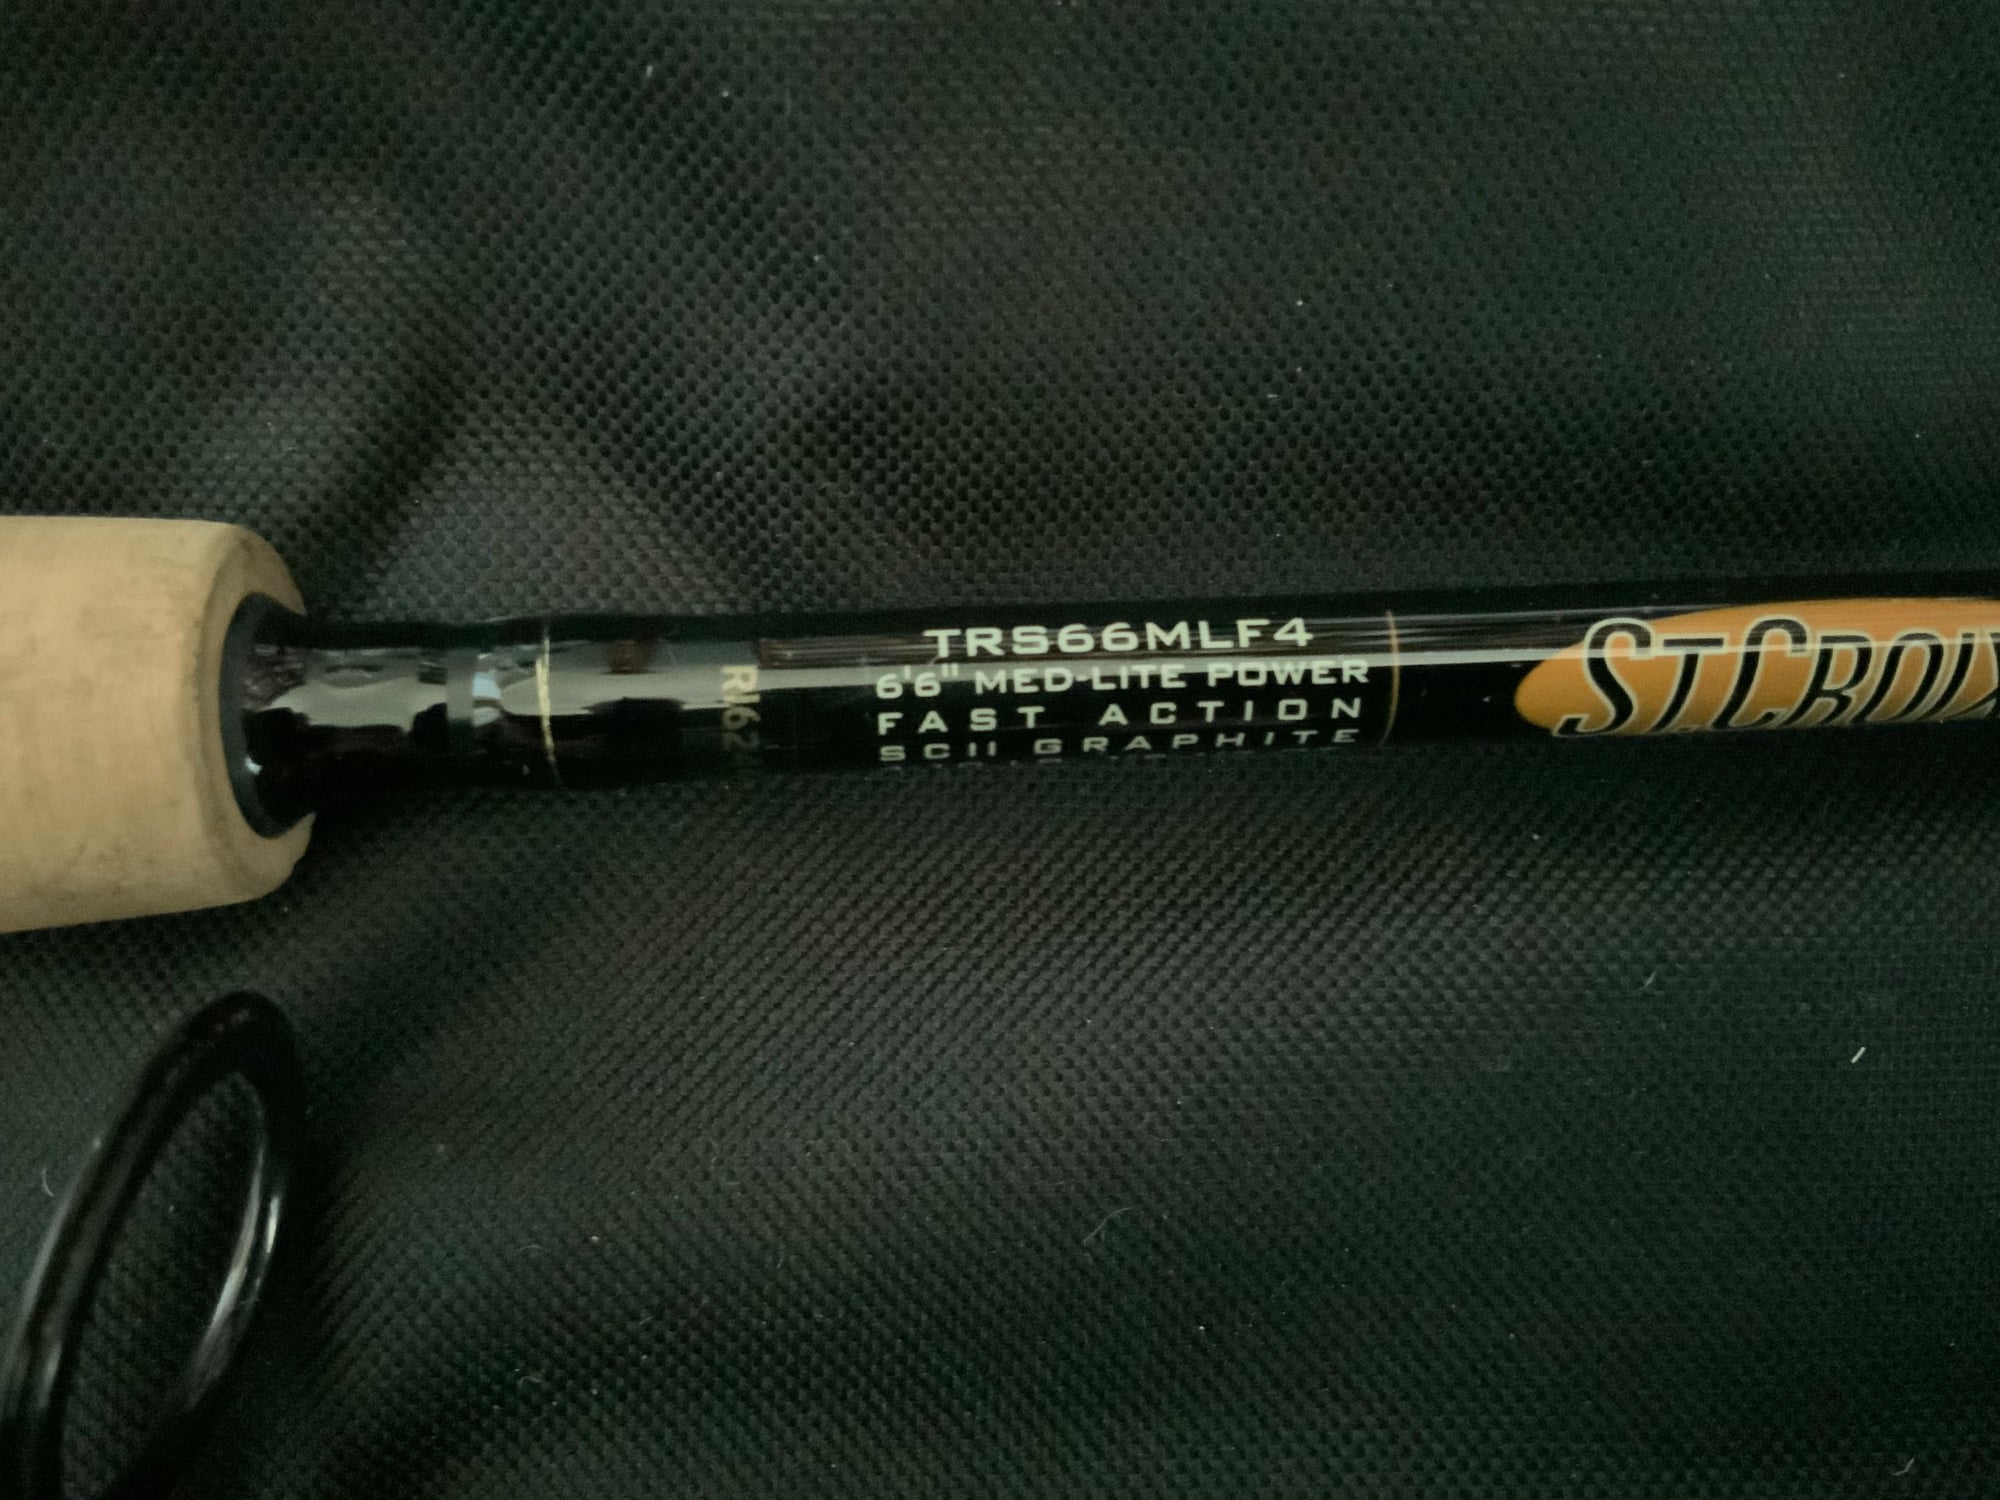 St Croix 4 piece travel rod spinning - The Hull Truth - Boating